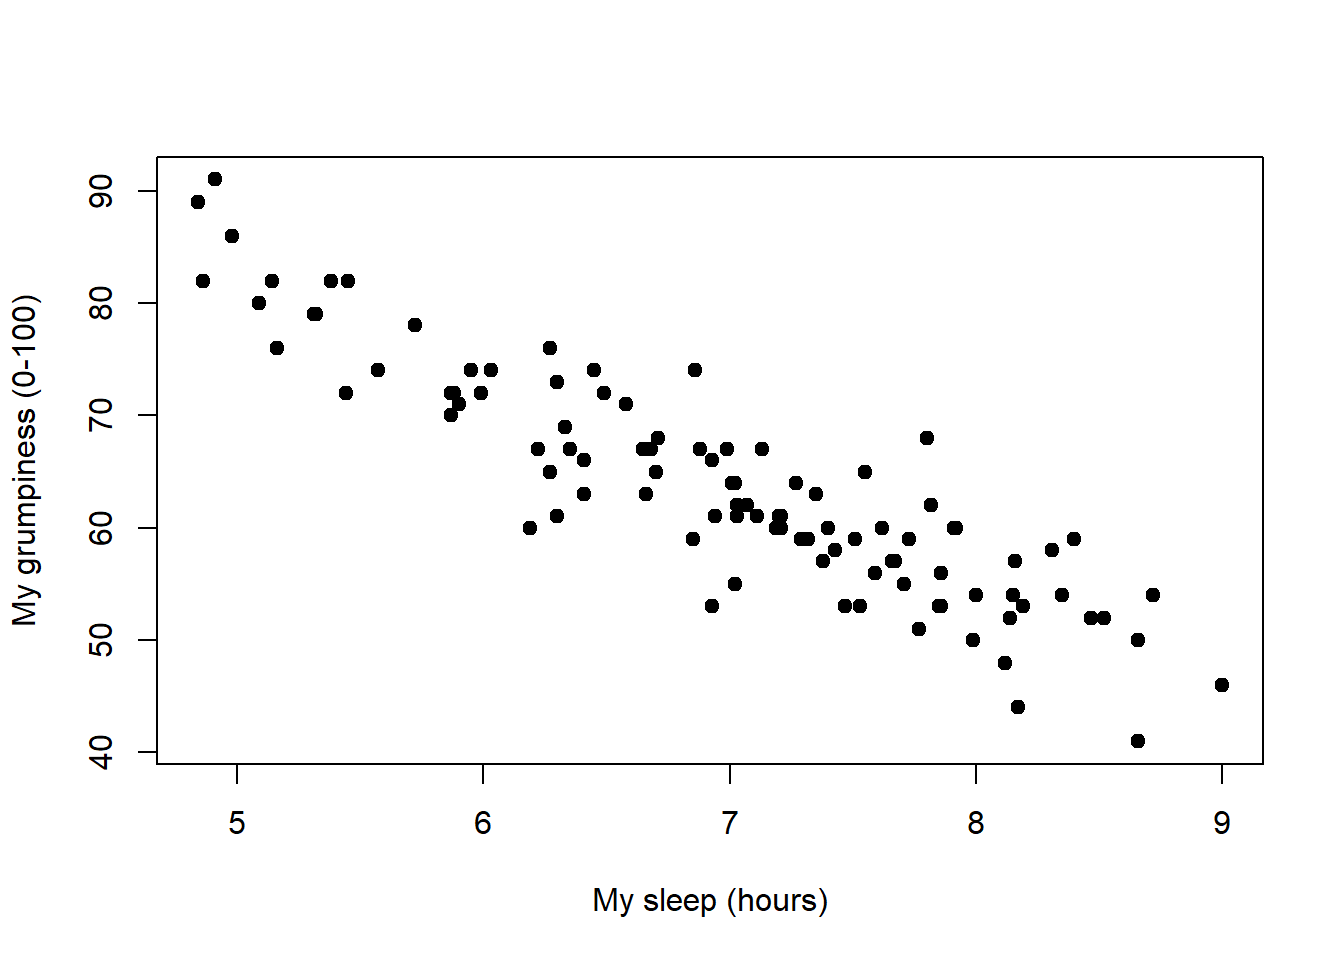 Scatterplot showing grumpiness as a function of hours slept.